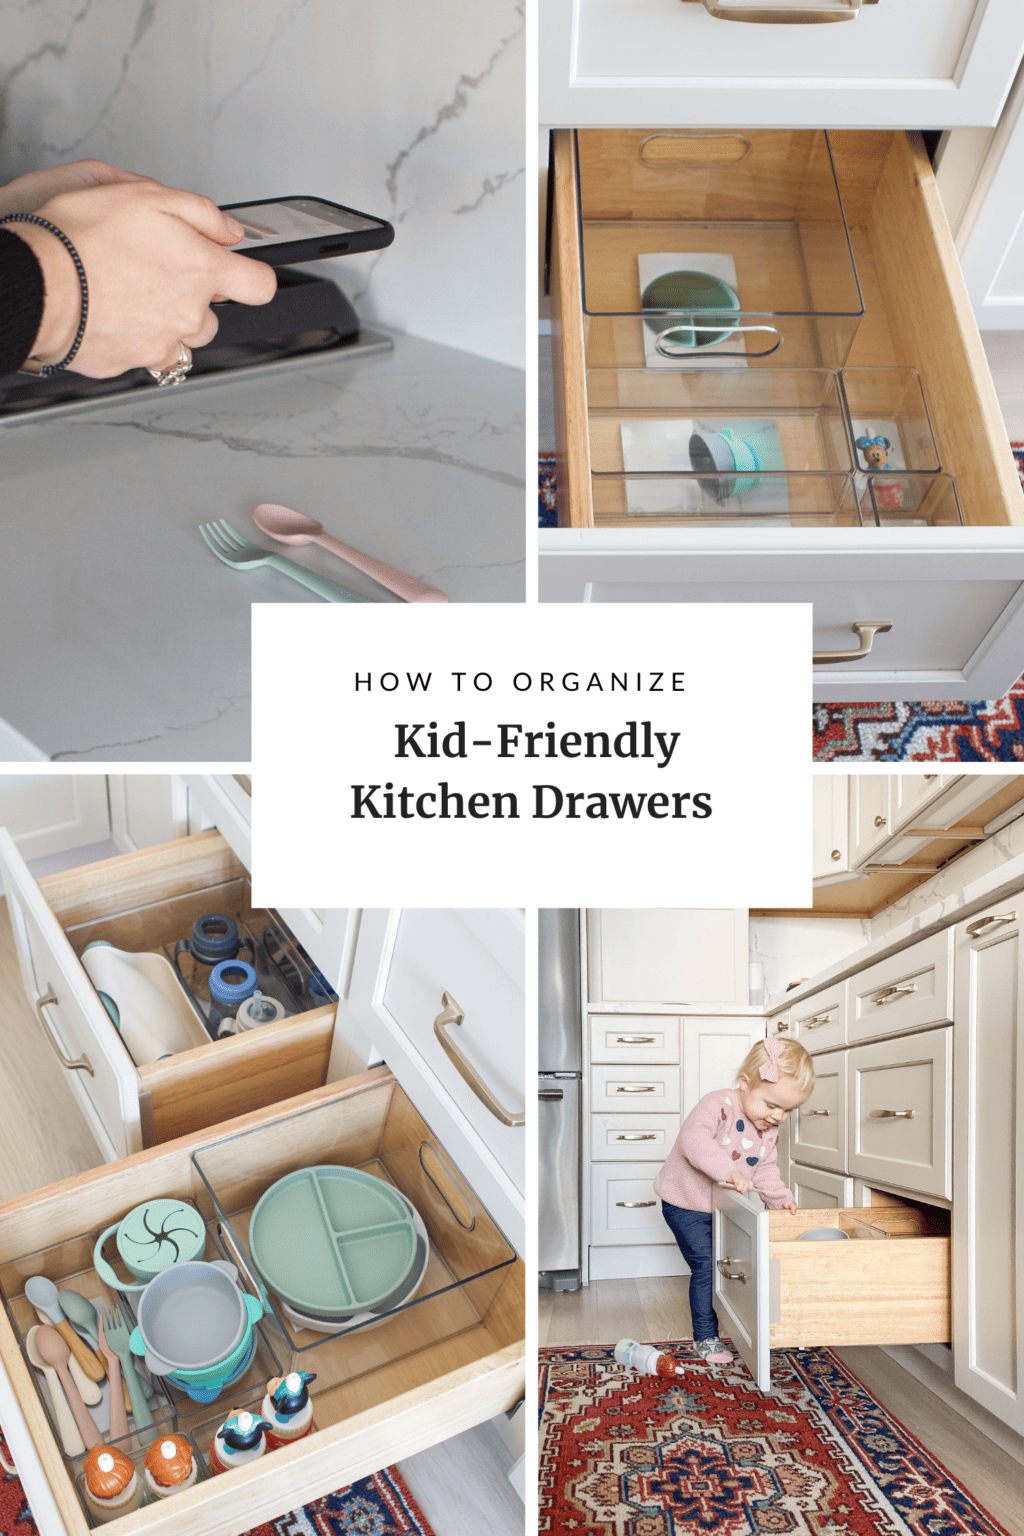 How to create kid-friendly kitchen drawers